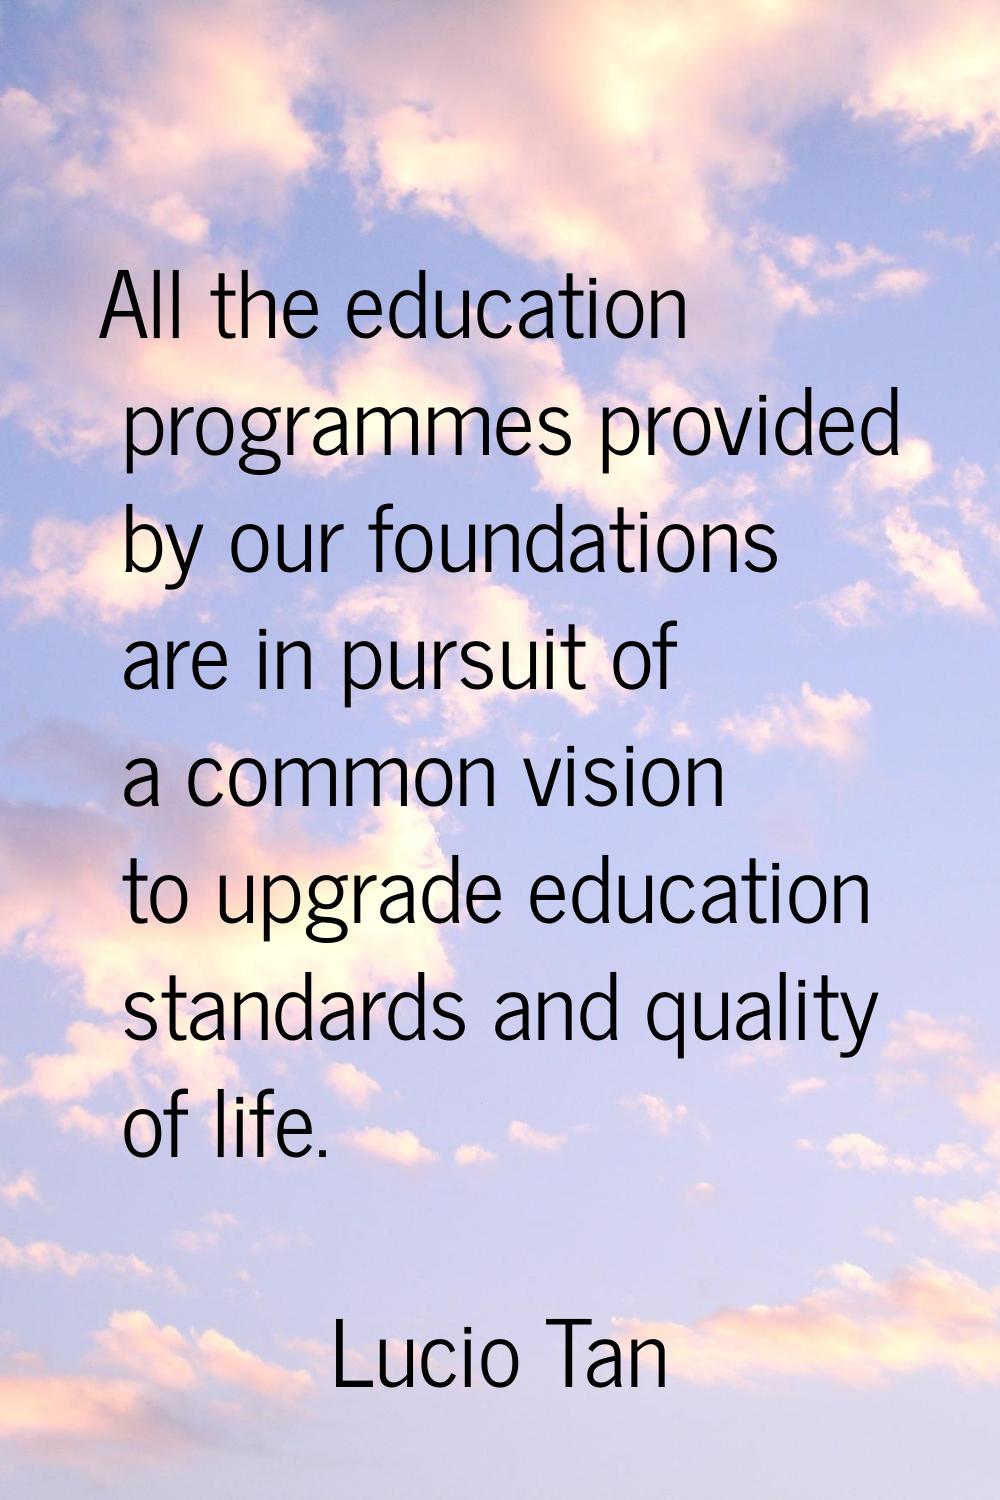 All the education programmes provided by our foundations are in pursuit of a common vision to upgra